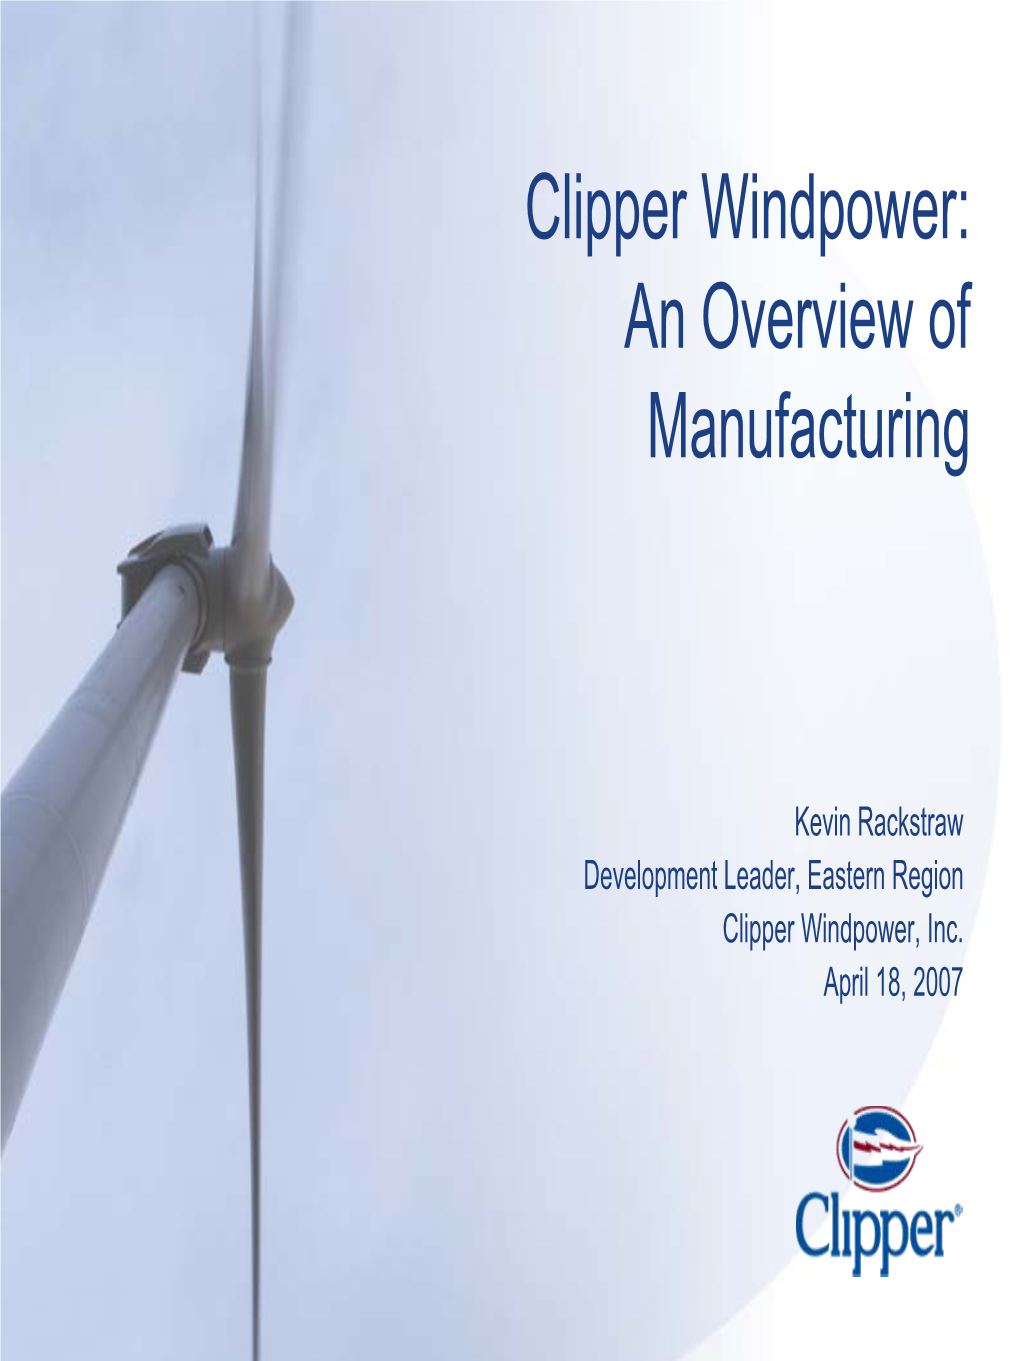 Clipper Windpower: an Overview of Manufacturing